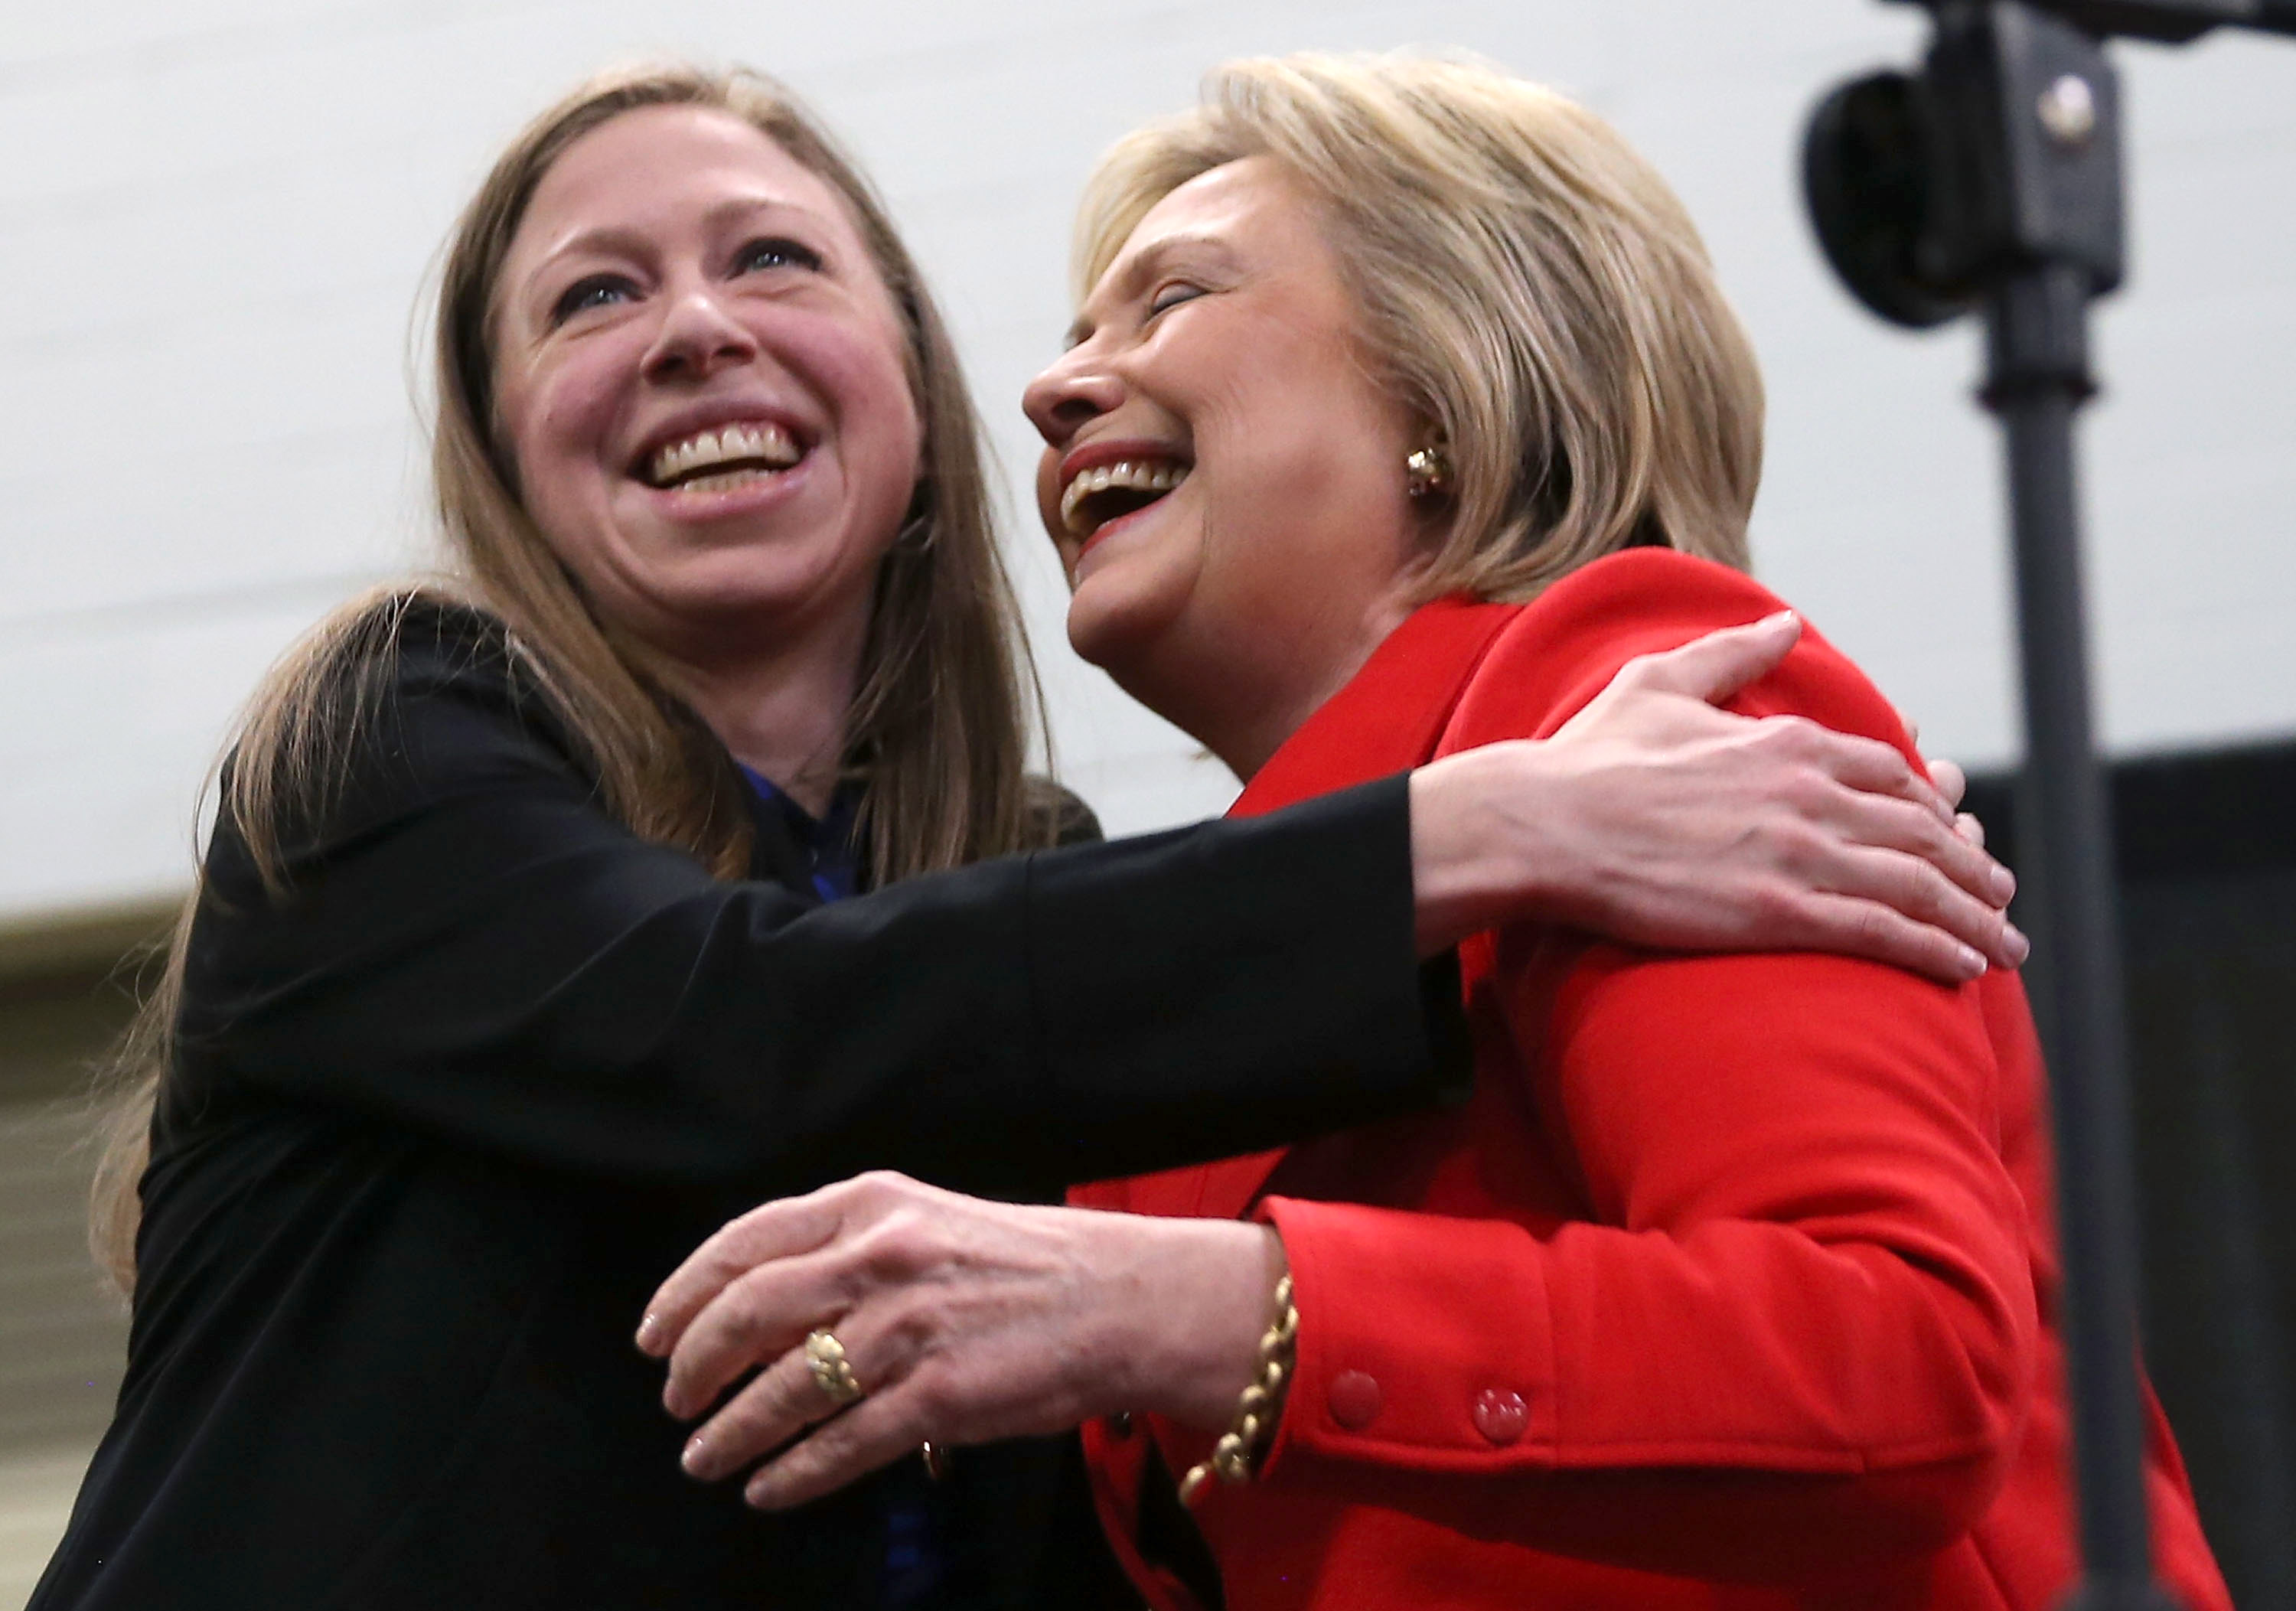 Chelsea Clinton Takes Over Hillary S Instagram For A Day With The Iowa Caucuses Looming